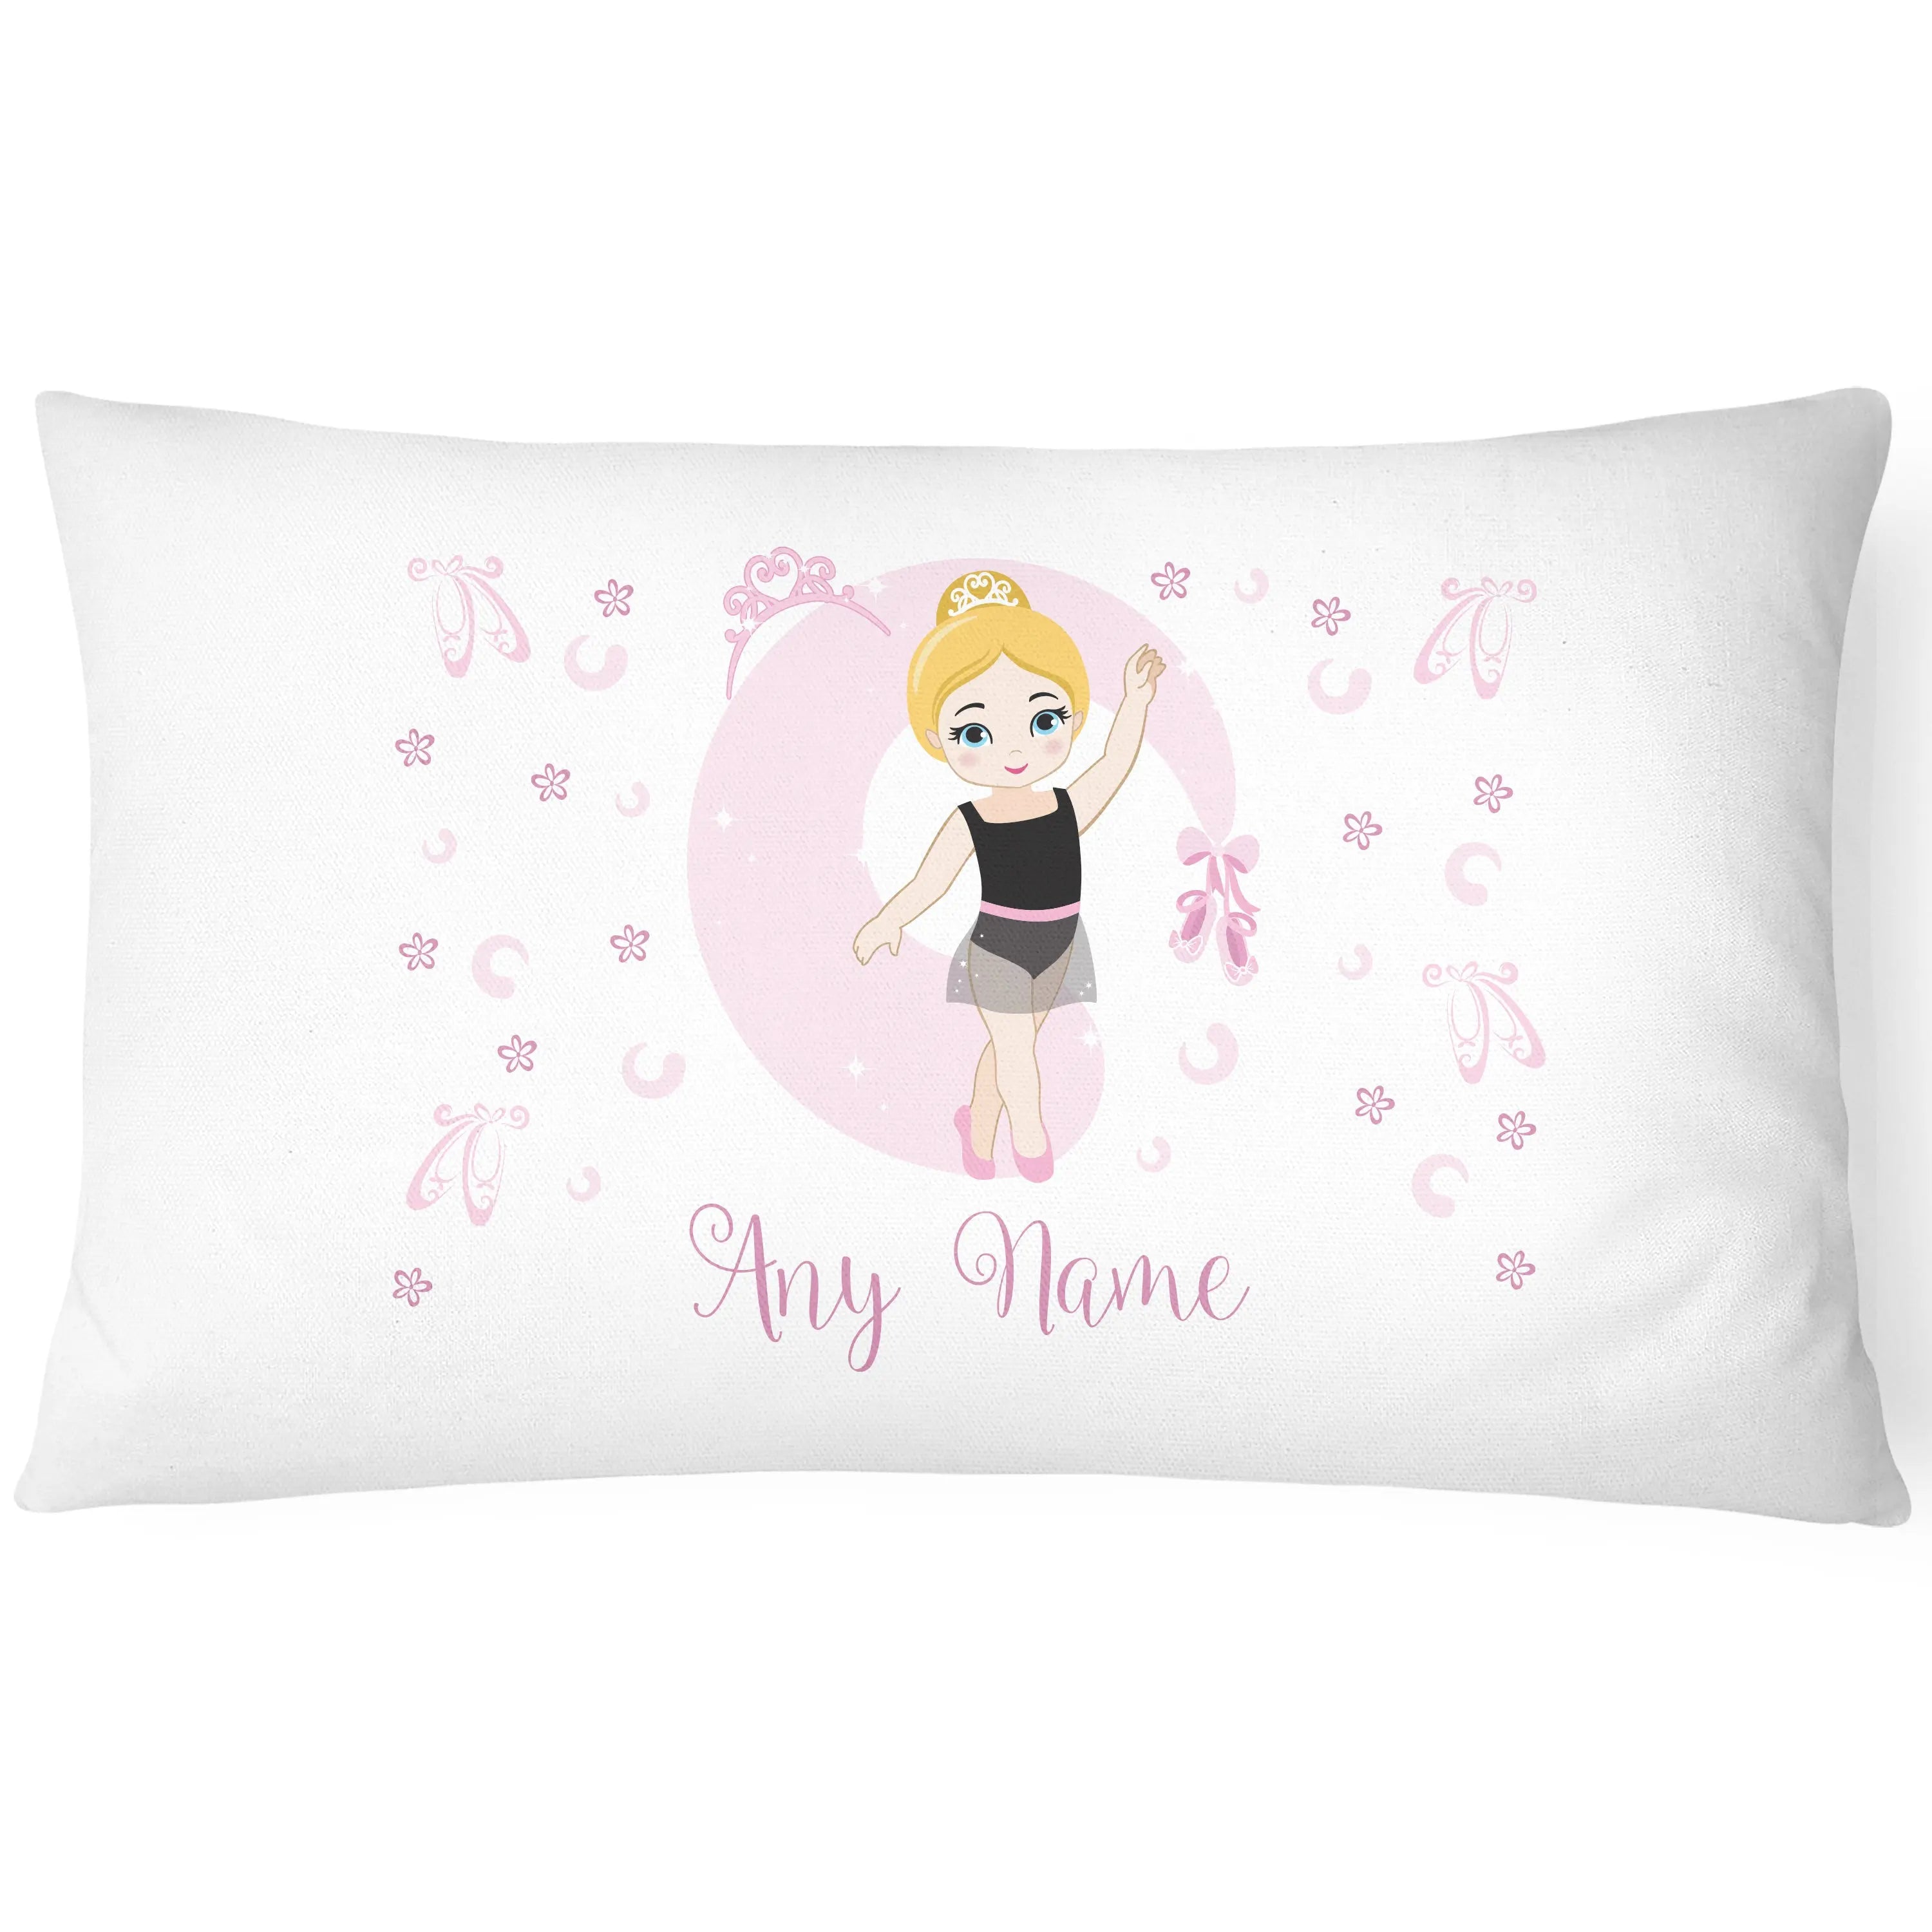 Ballerina Children's Pillowcase - Personalise with Any Name Cute - CushionPop